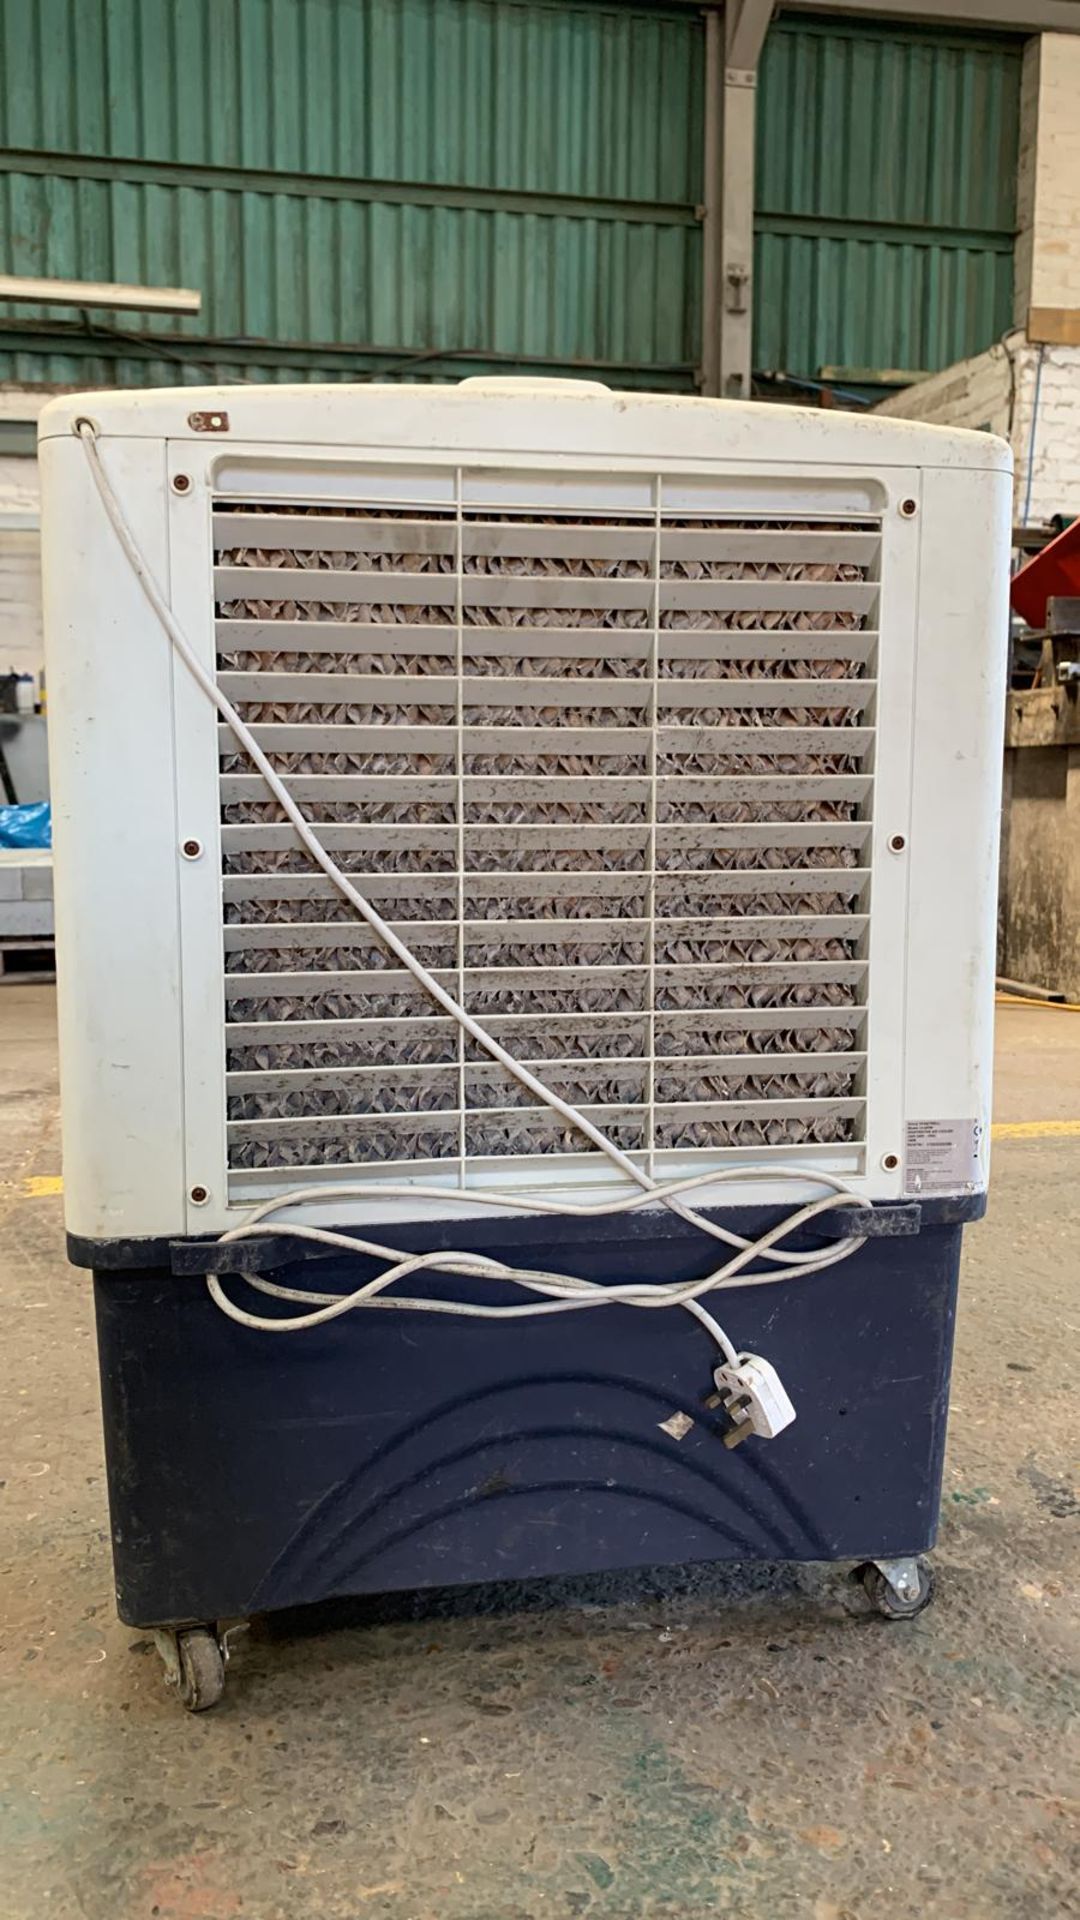 3 x PORTABLE AIR CONDITIONER - WORKING - Image 2 of 2